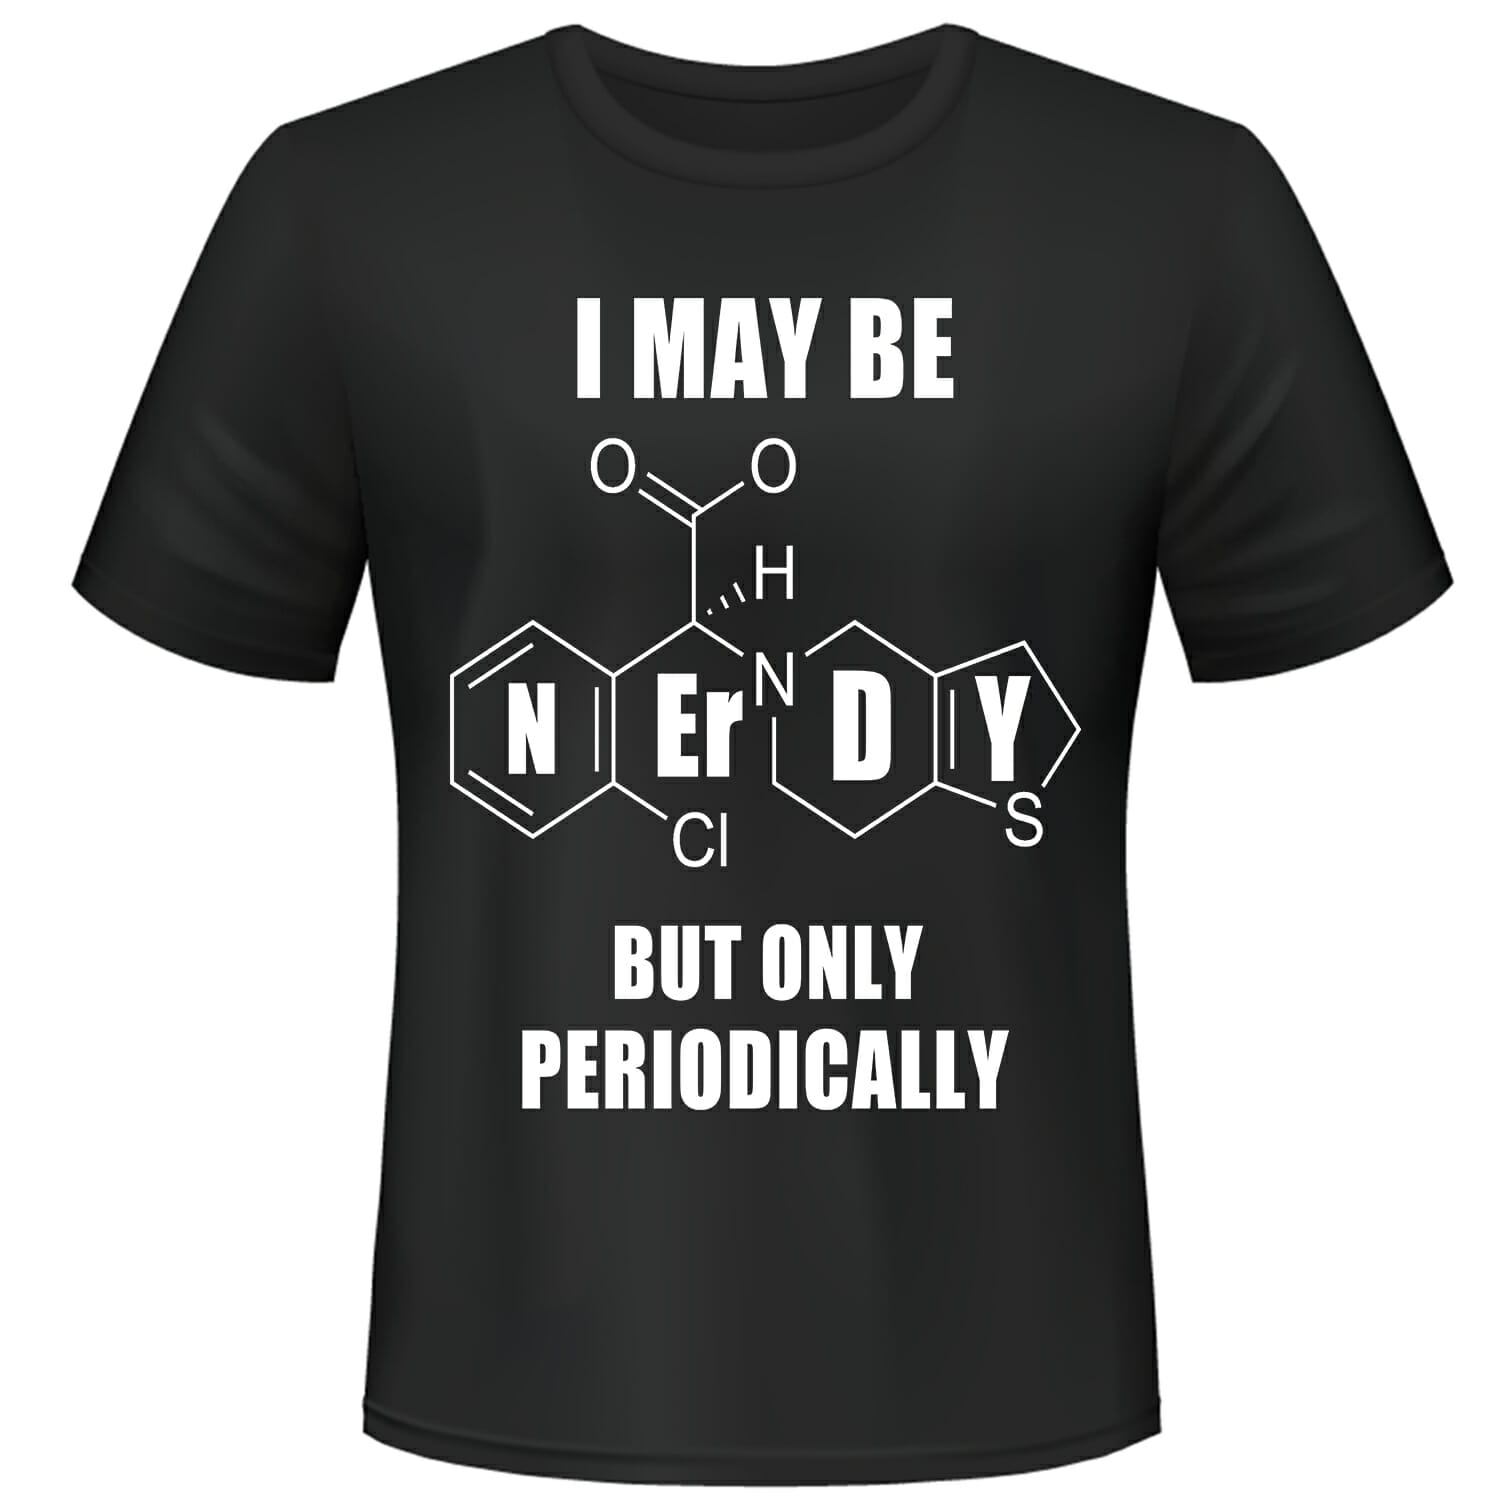 I may be nerdy but only periodically tshirt design